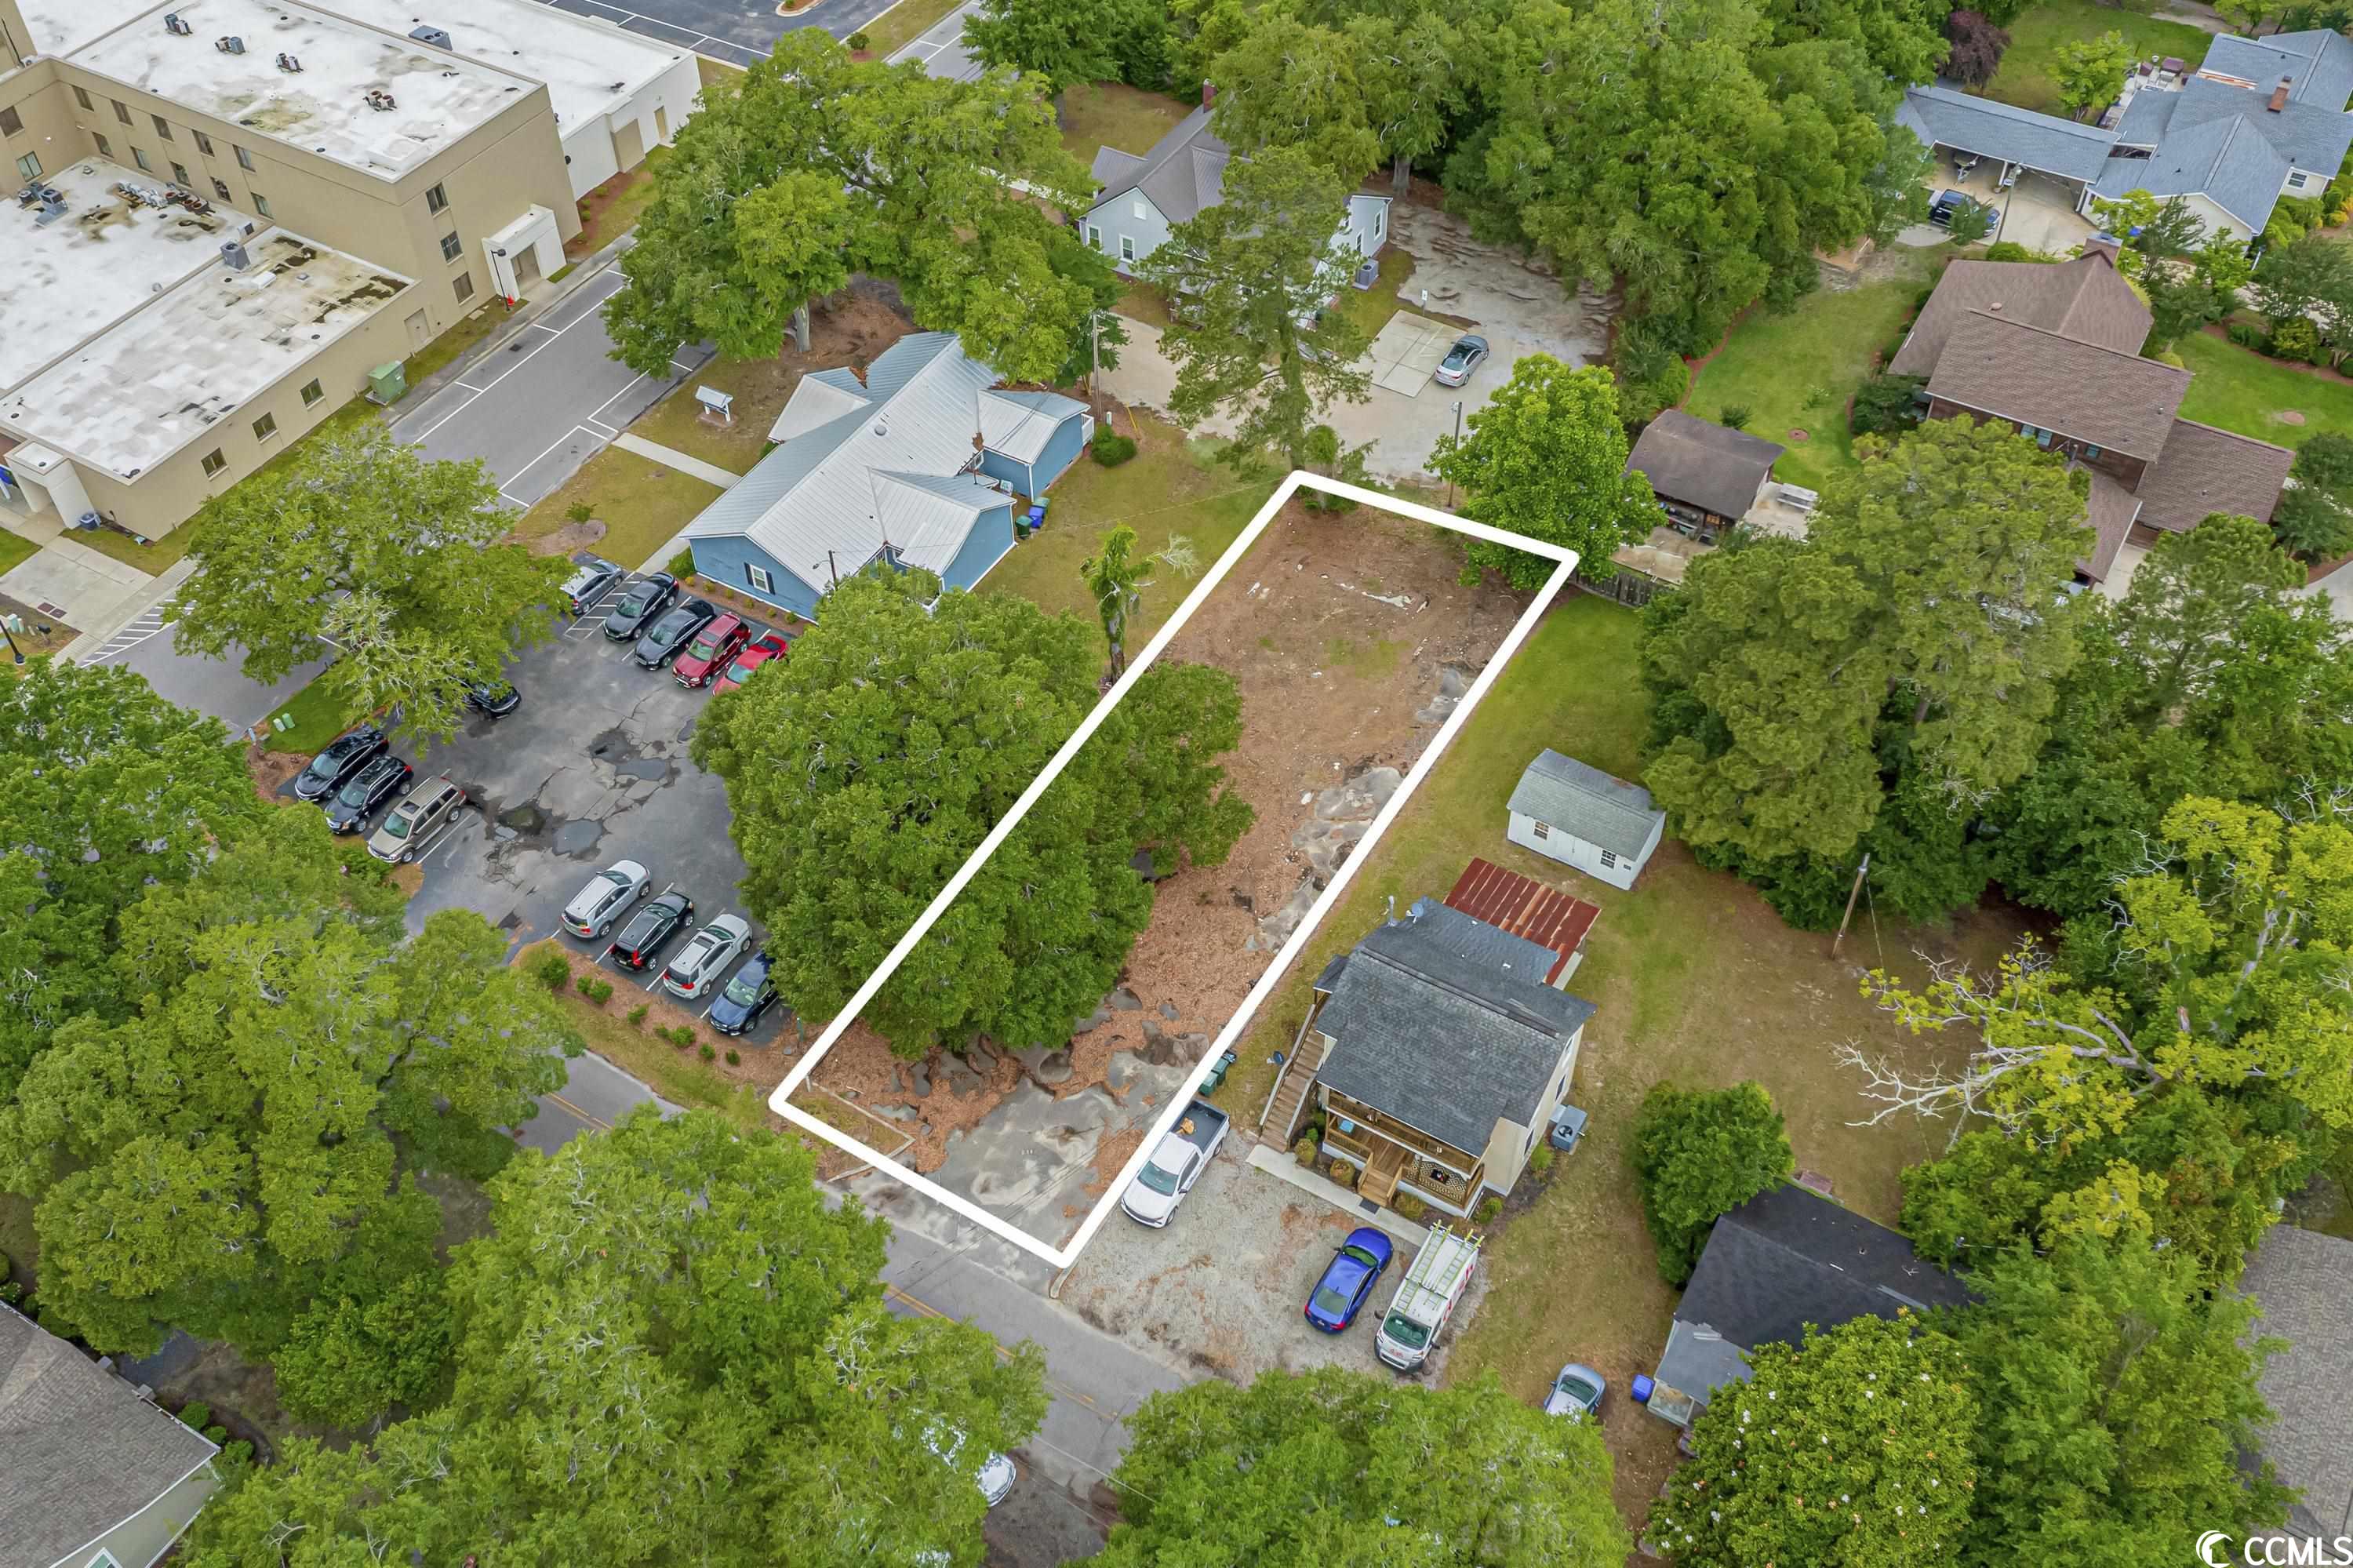 vacant lot formerly used for a medical office in downtown conway.  zoned p (professional).  professional district is intended for office, institutional, and residential uses per city of conway. please see city of conway zoning ordinance for a full list of permitted uses in this district.